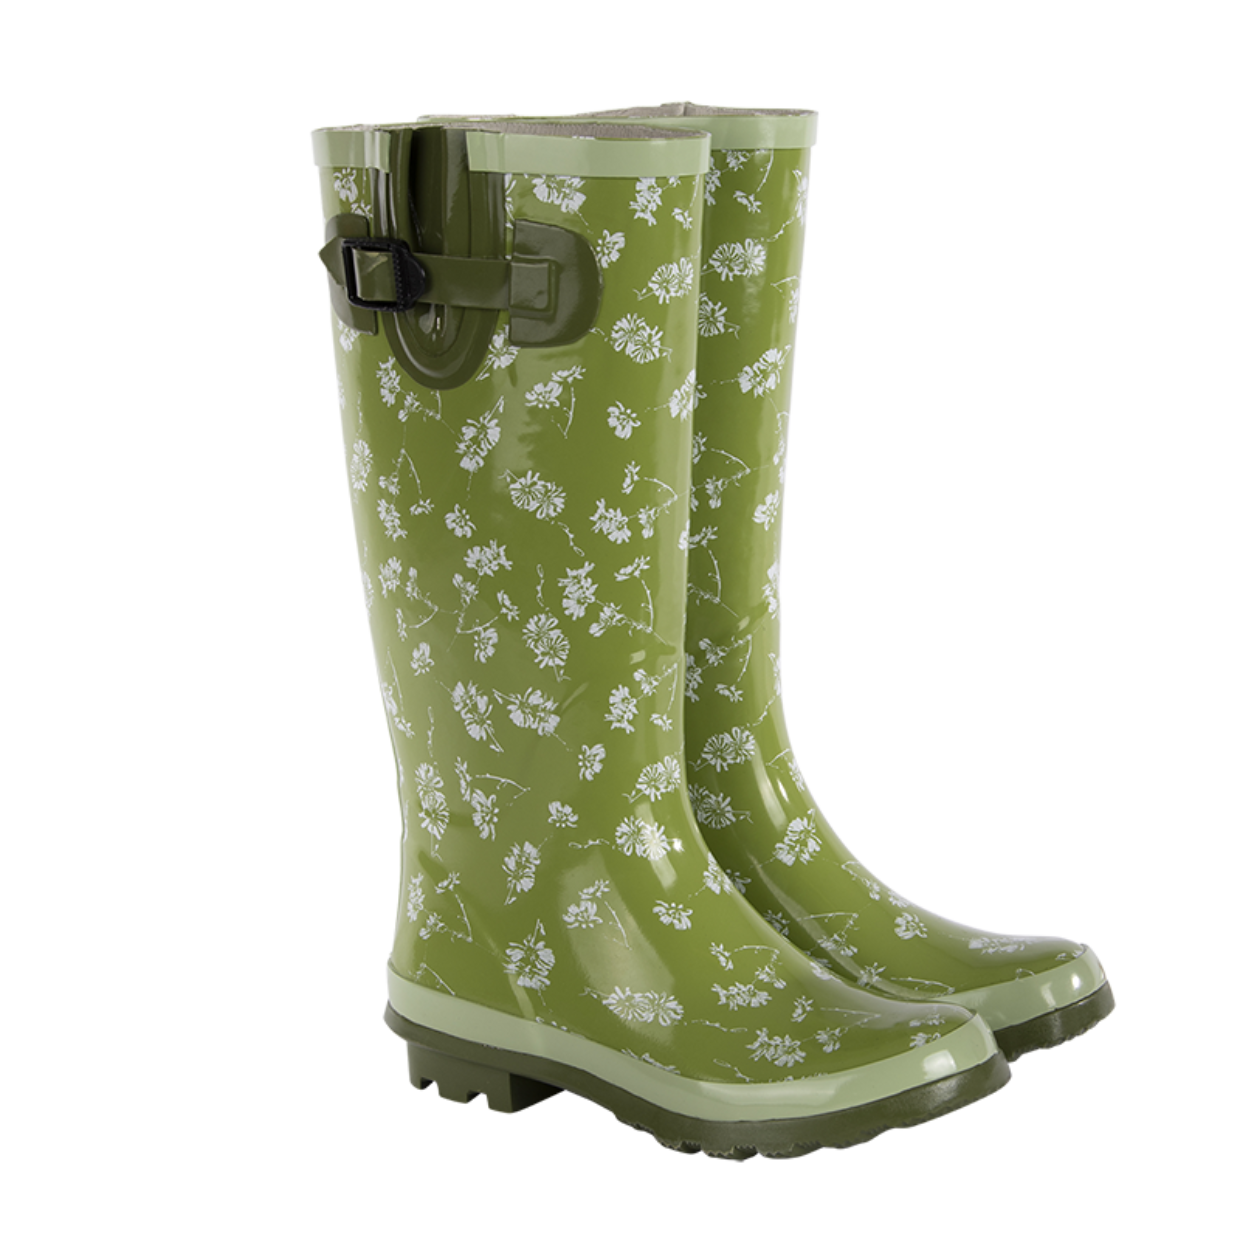 Wellies Transparent Images